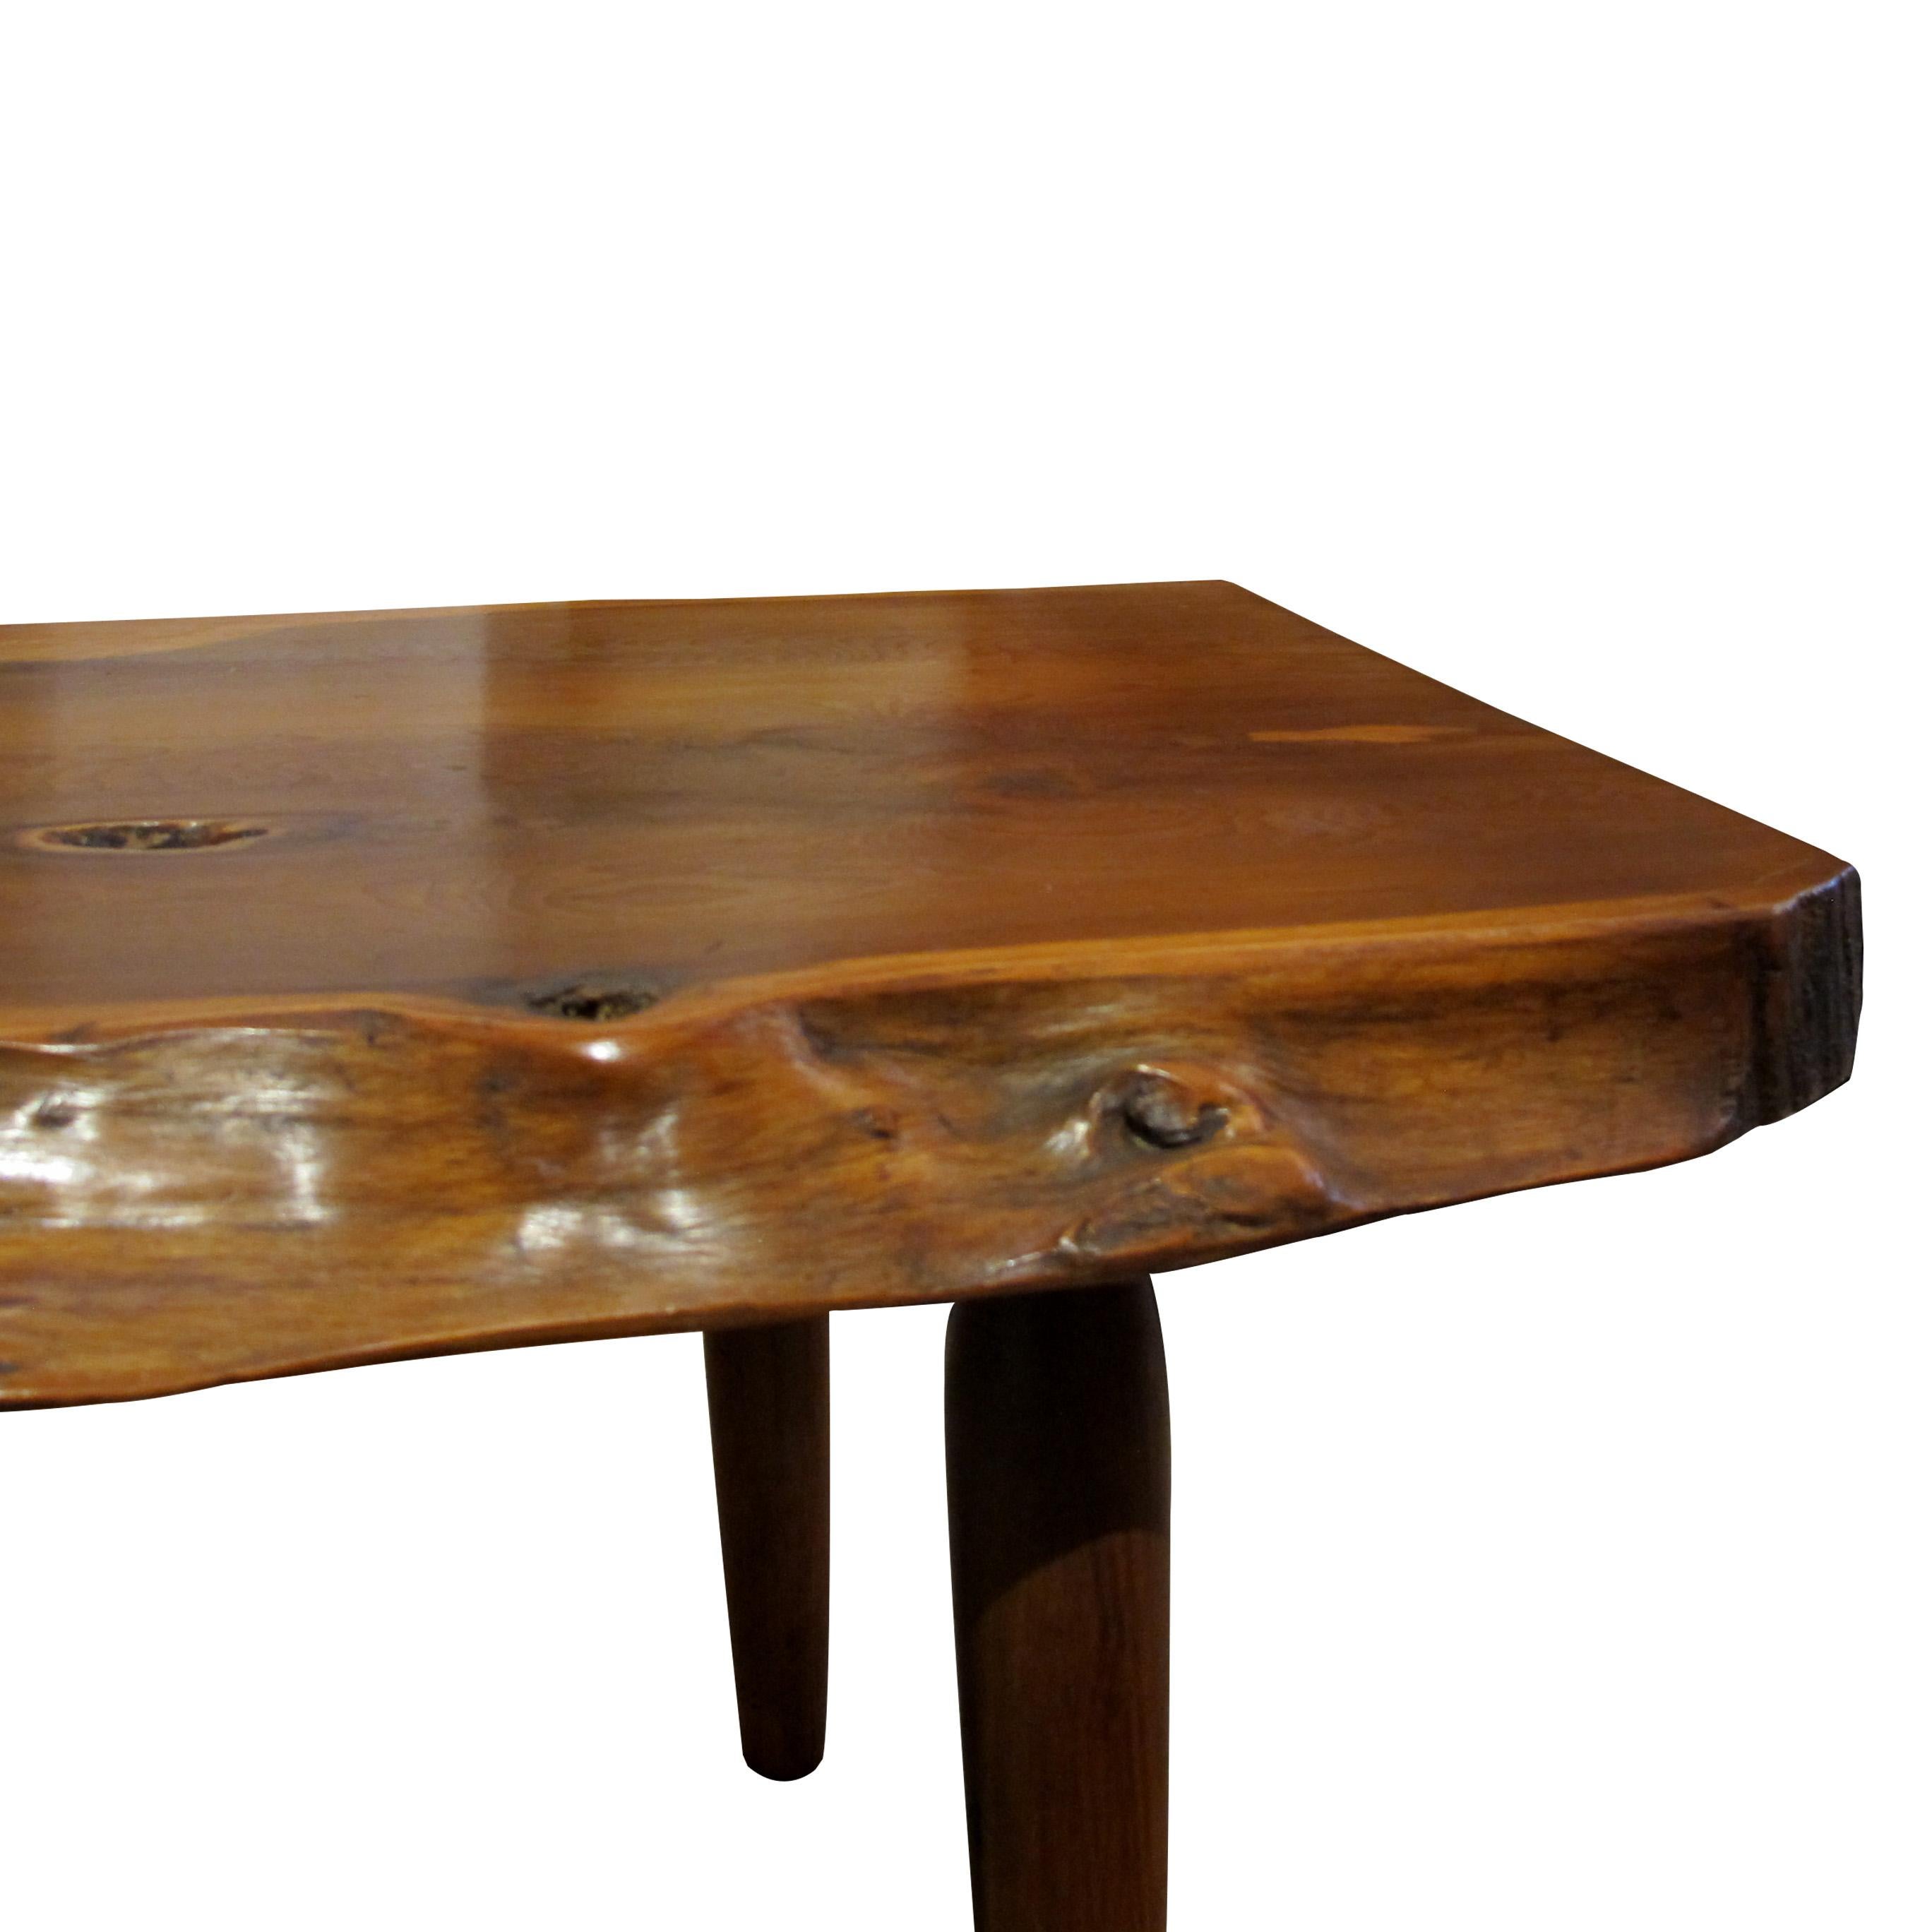 1960s English Live Edge Yew Wood Bench attributed to Reynolds Of Ludlow 1